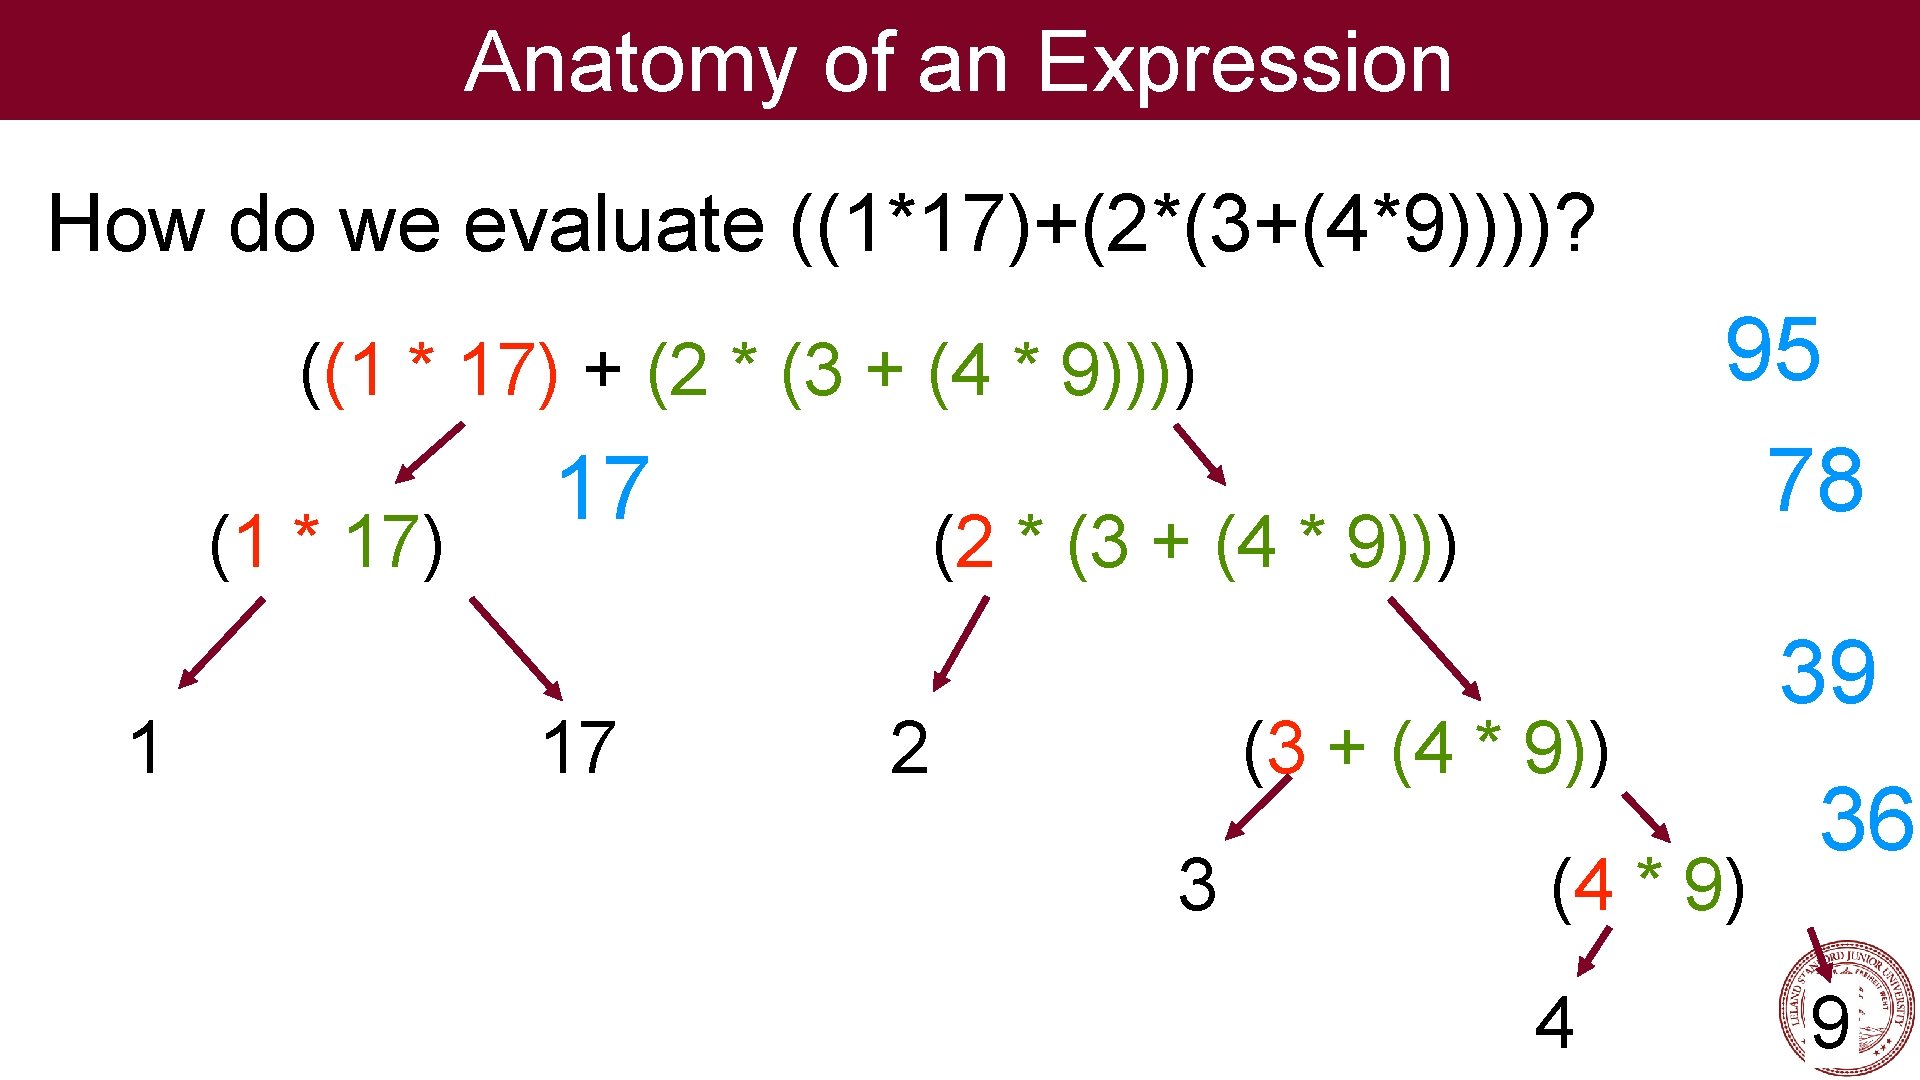 Anatomy of an Expression How do we evaluate ((1*17)+(2*(3+(4*9))))? 95 78 ((1 * 17)